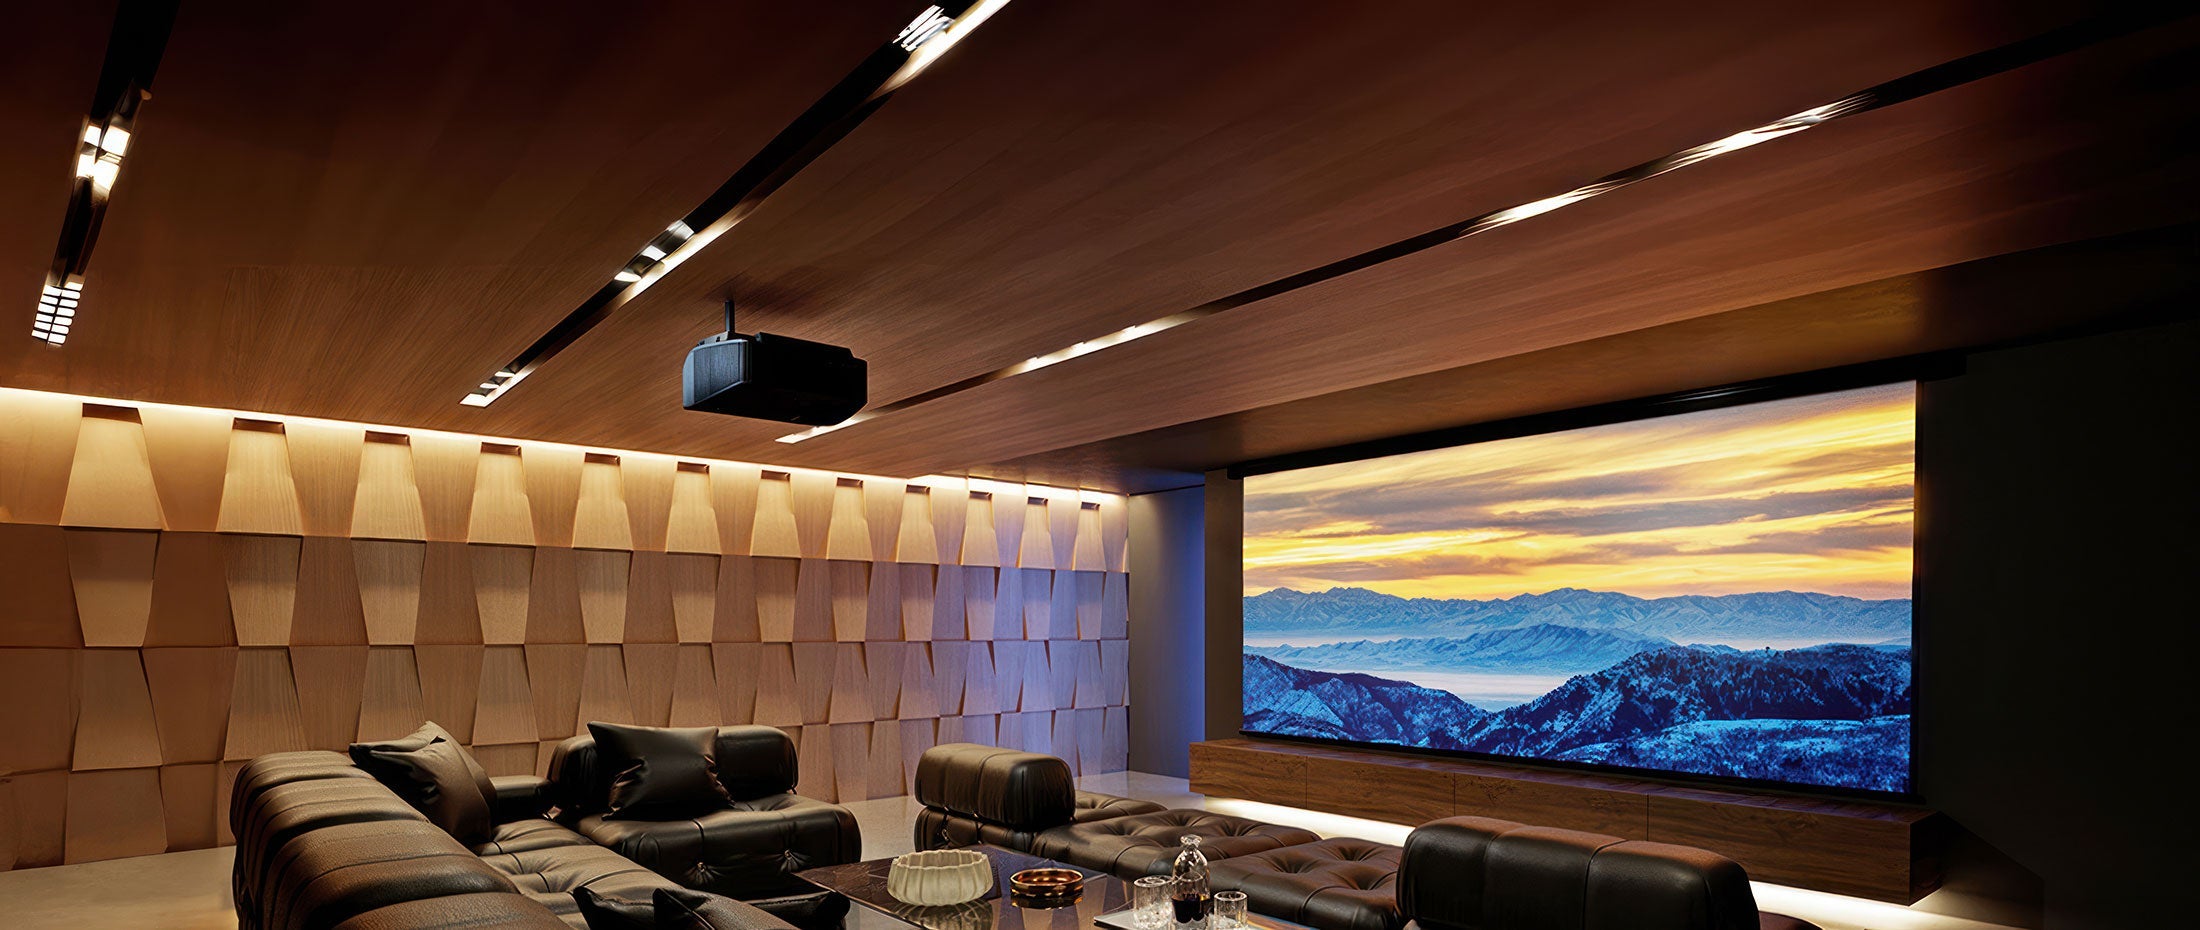 A residential home theater room.